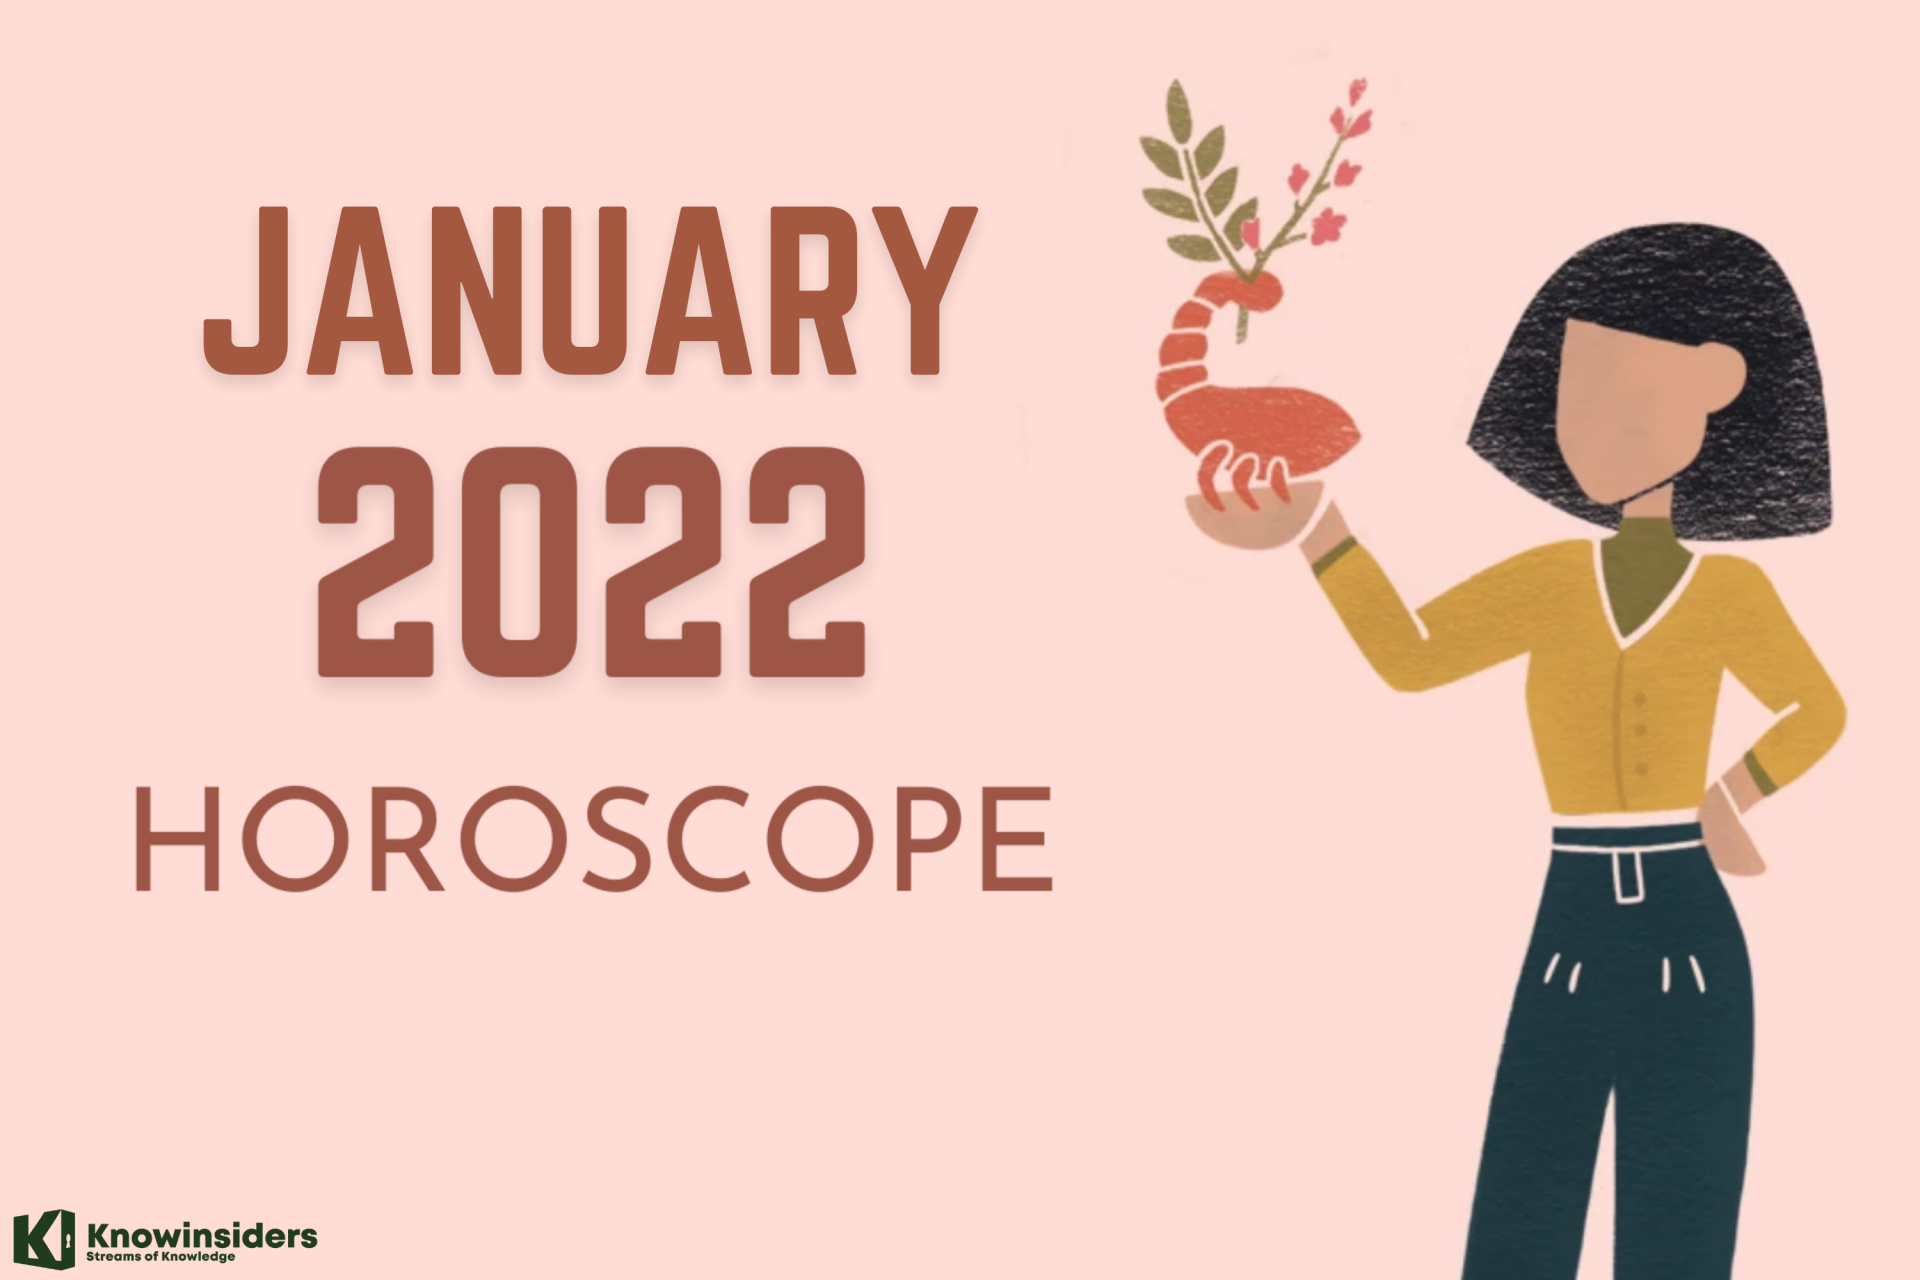 JANUARY 2022 Monthly Horoscope: Astrological Prediction for All 12 Zodiac Signs